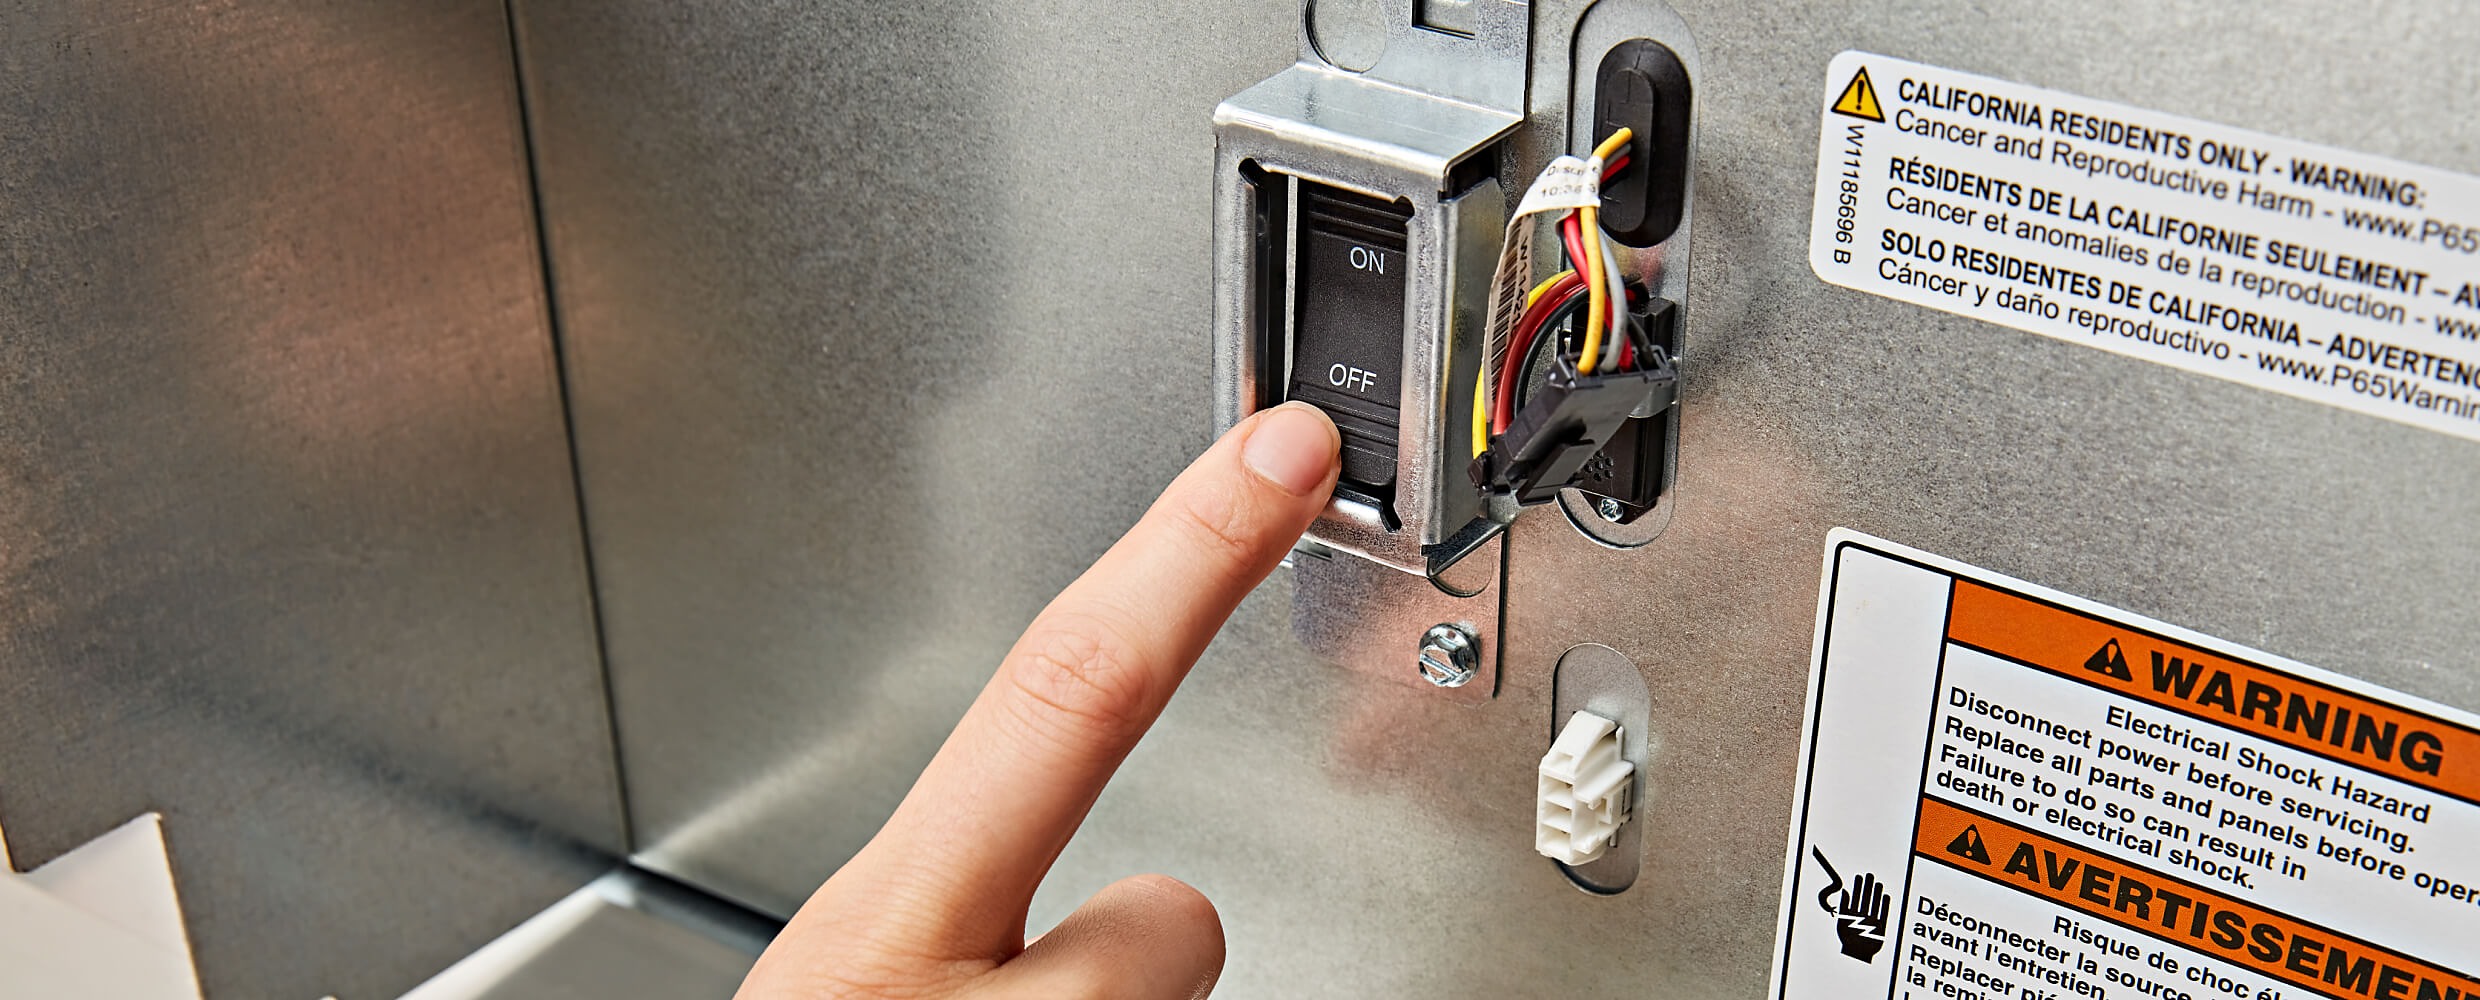 ON/OFF Power Switch of the 48" KitchenAid® Built-In Side-by-Side Refrigerator